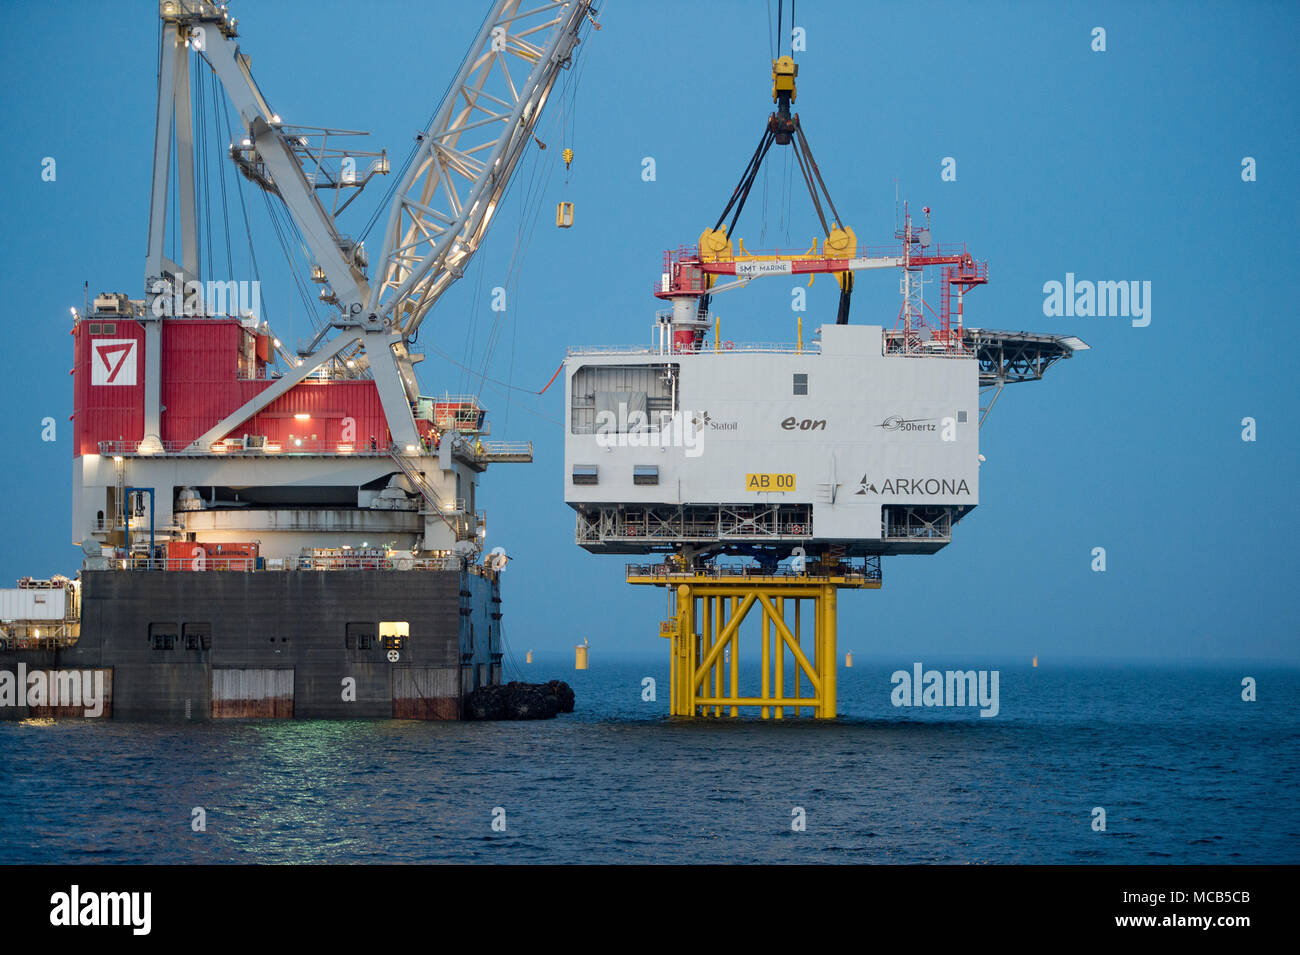 08 April 2018, Germany, Sassnitz: The 4,000 tons weighing transformer platform is being mounted with the help of crane ship 'Oleg Strashnov' at the offshore wind park 'Arkona' near Ruegen Island. Offshore wind park 'Arkona' is expected to be brought online in early 2019 delivering 385 megawatt of energy from 60 wind turbines. Energy company Eon and Norwegian energy company Statoil are investing around 1, 2 billion euro into the project. - NO WIRE SERVICE - Photo: Stefan Sauer/dpa-Zentralbild/dpa Stock Photo